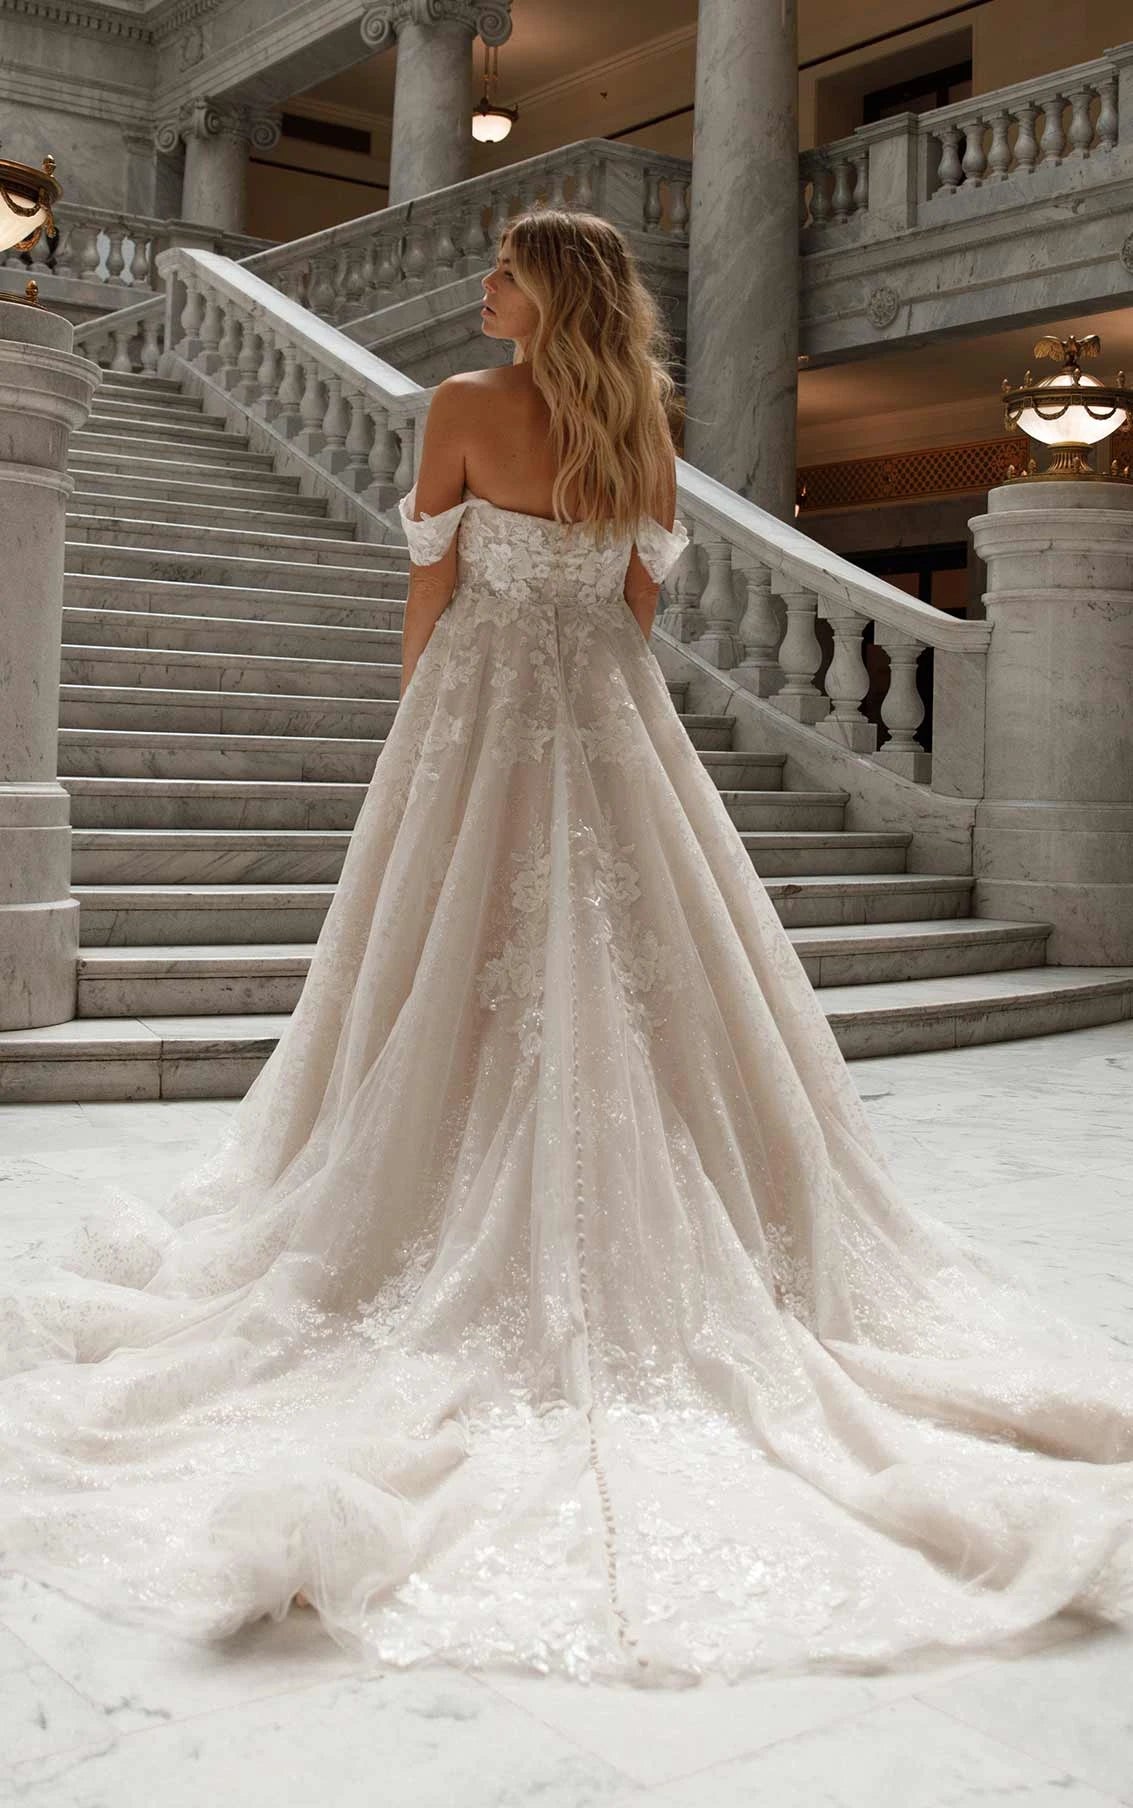 Lace Sweetheart Neckline Wedding Dress | Philly Bridal